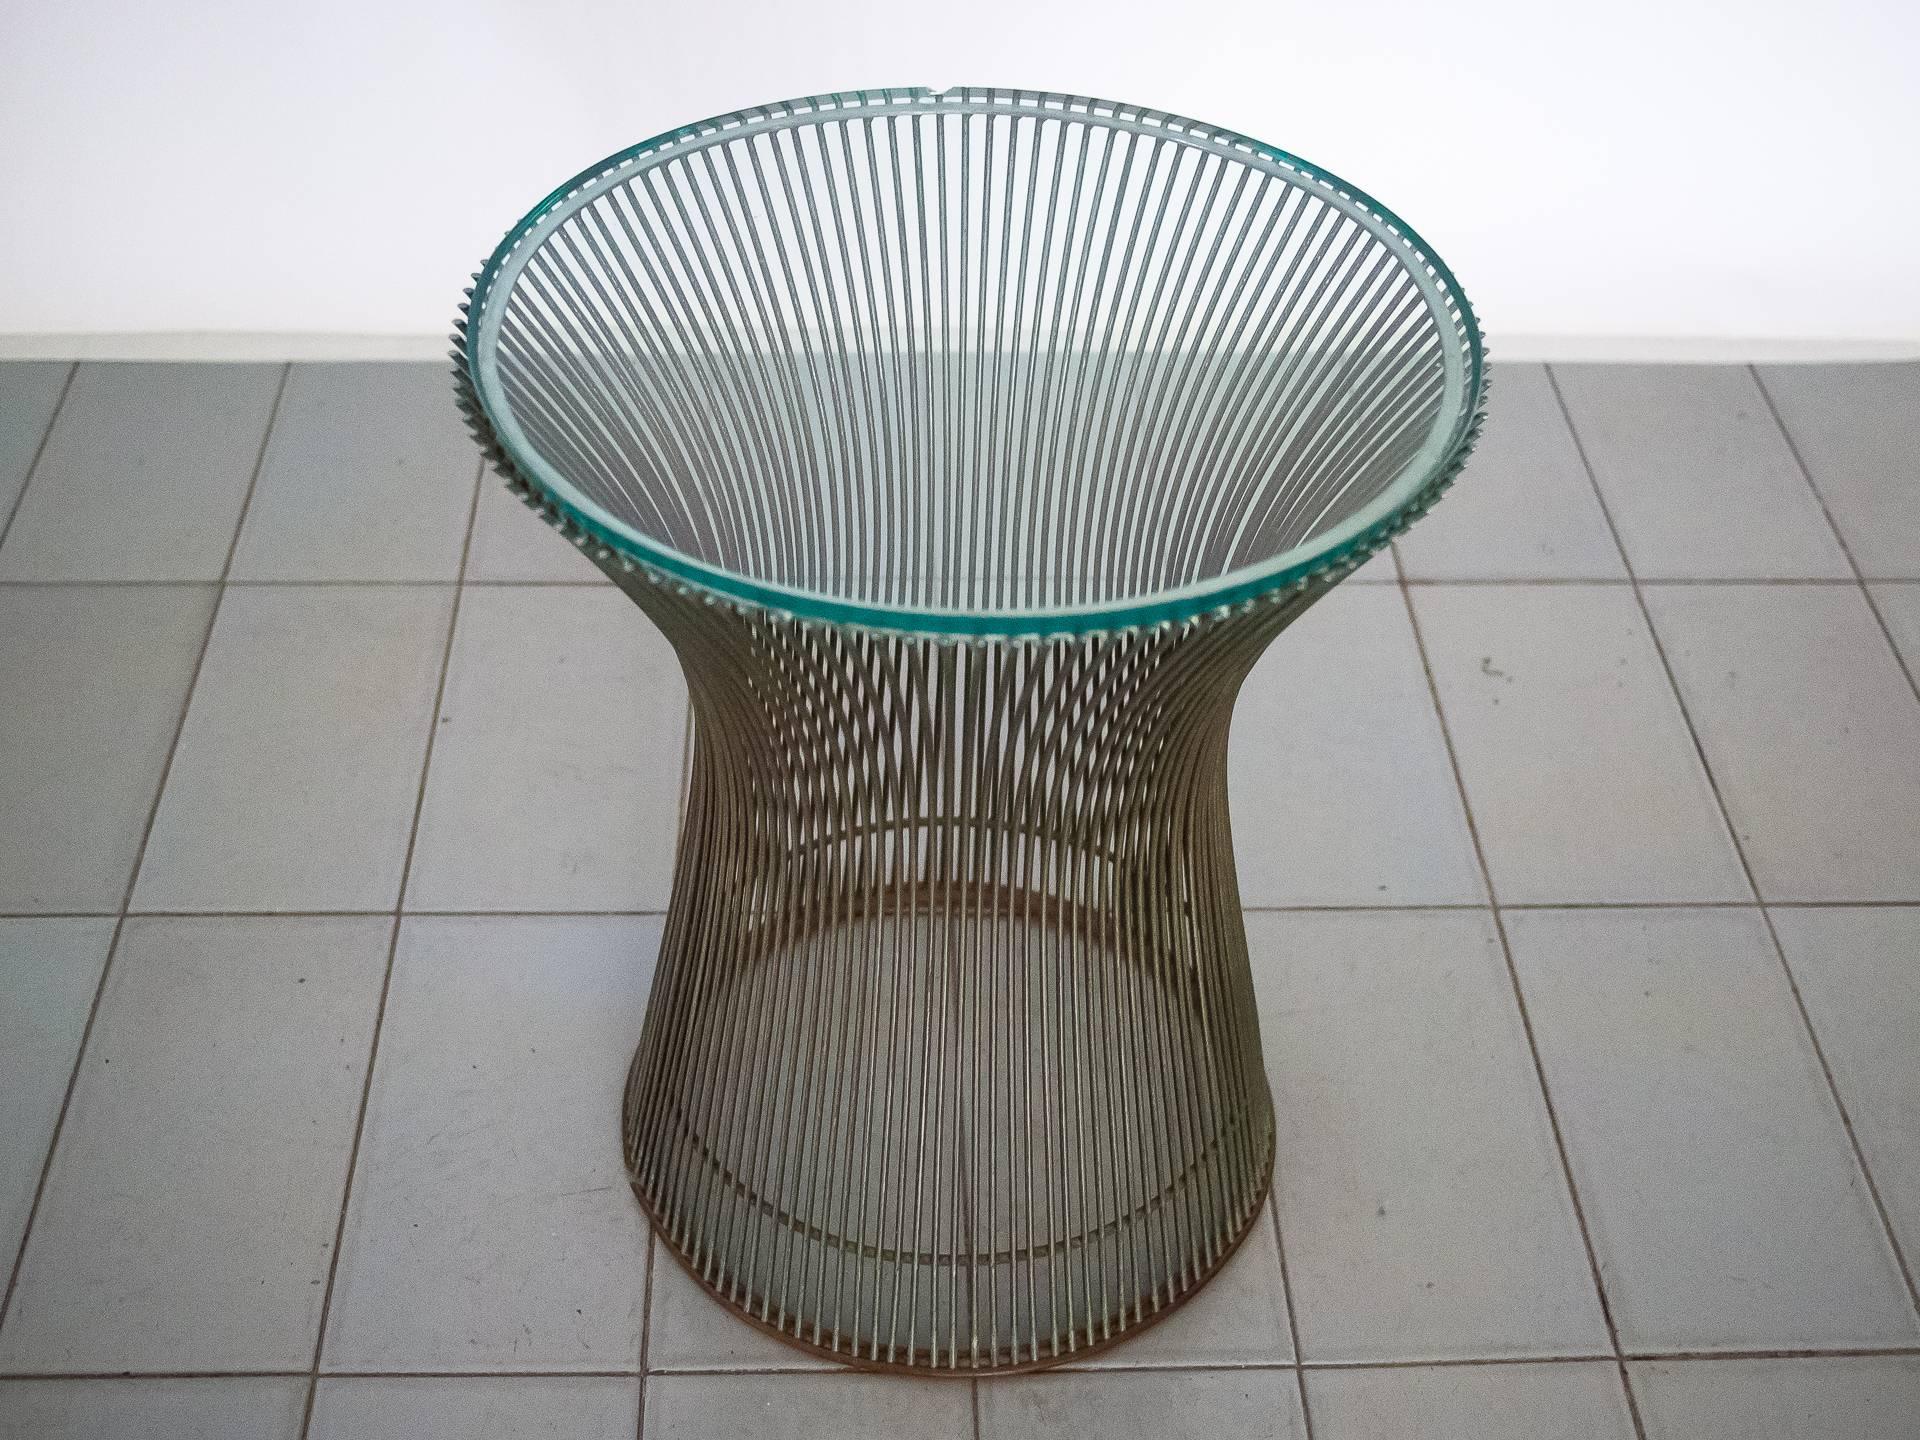 Mid-Century Modern Side Table Iron and Glass by Warren Platner for Knoll Inc., Brazilian Production